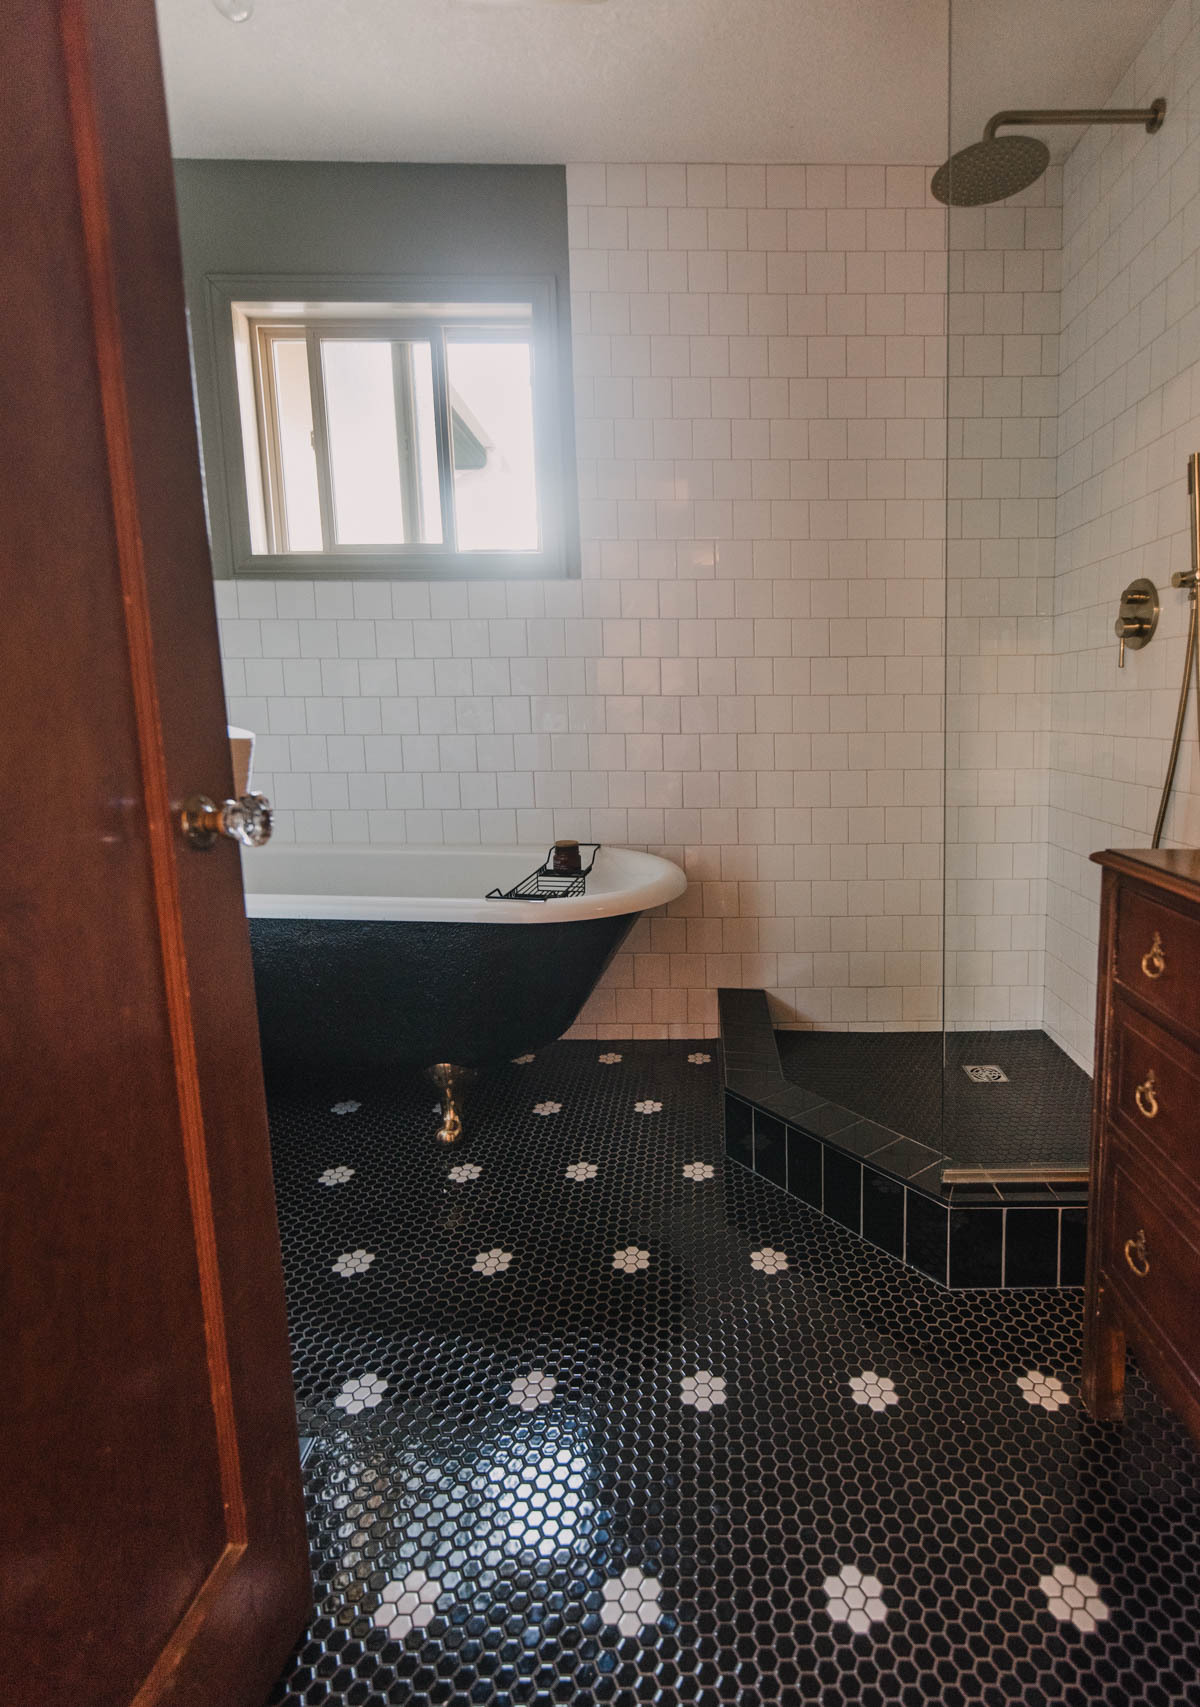 Classic bathroom renovation with clawfoot tub, wood vanity and black and white tile